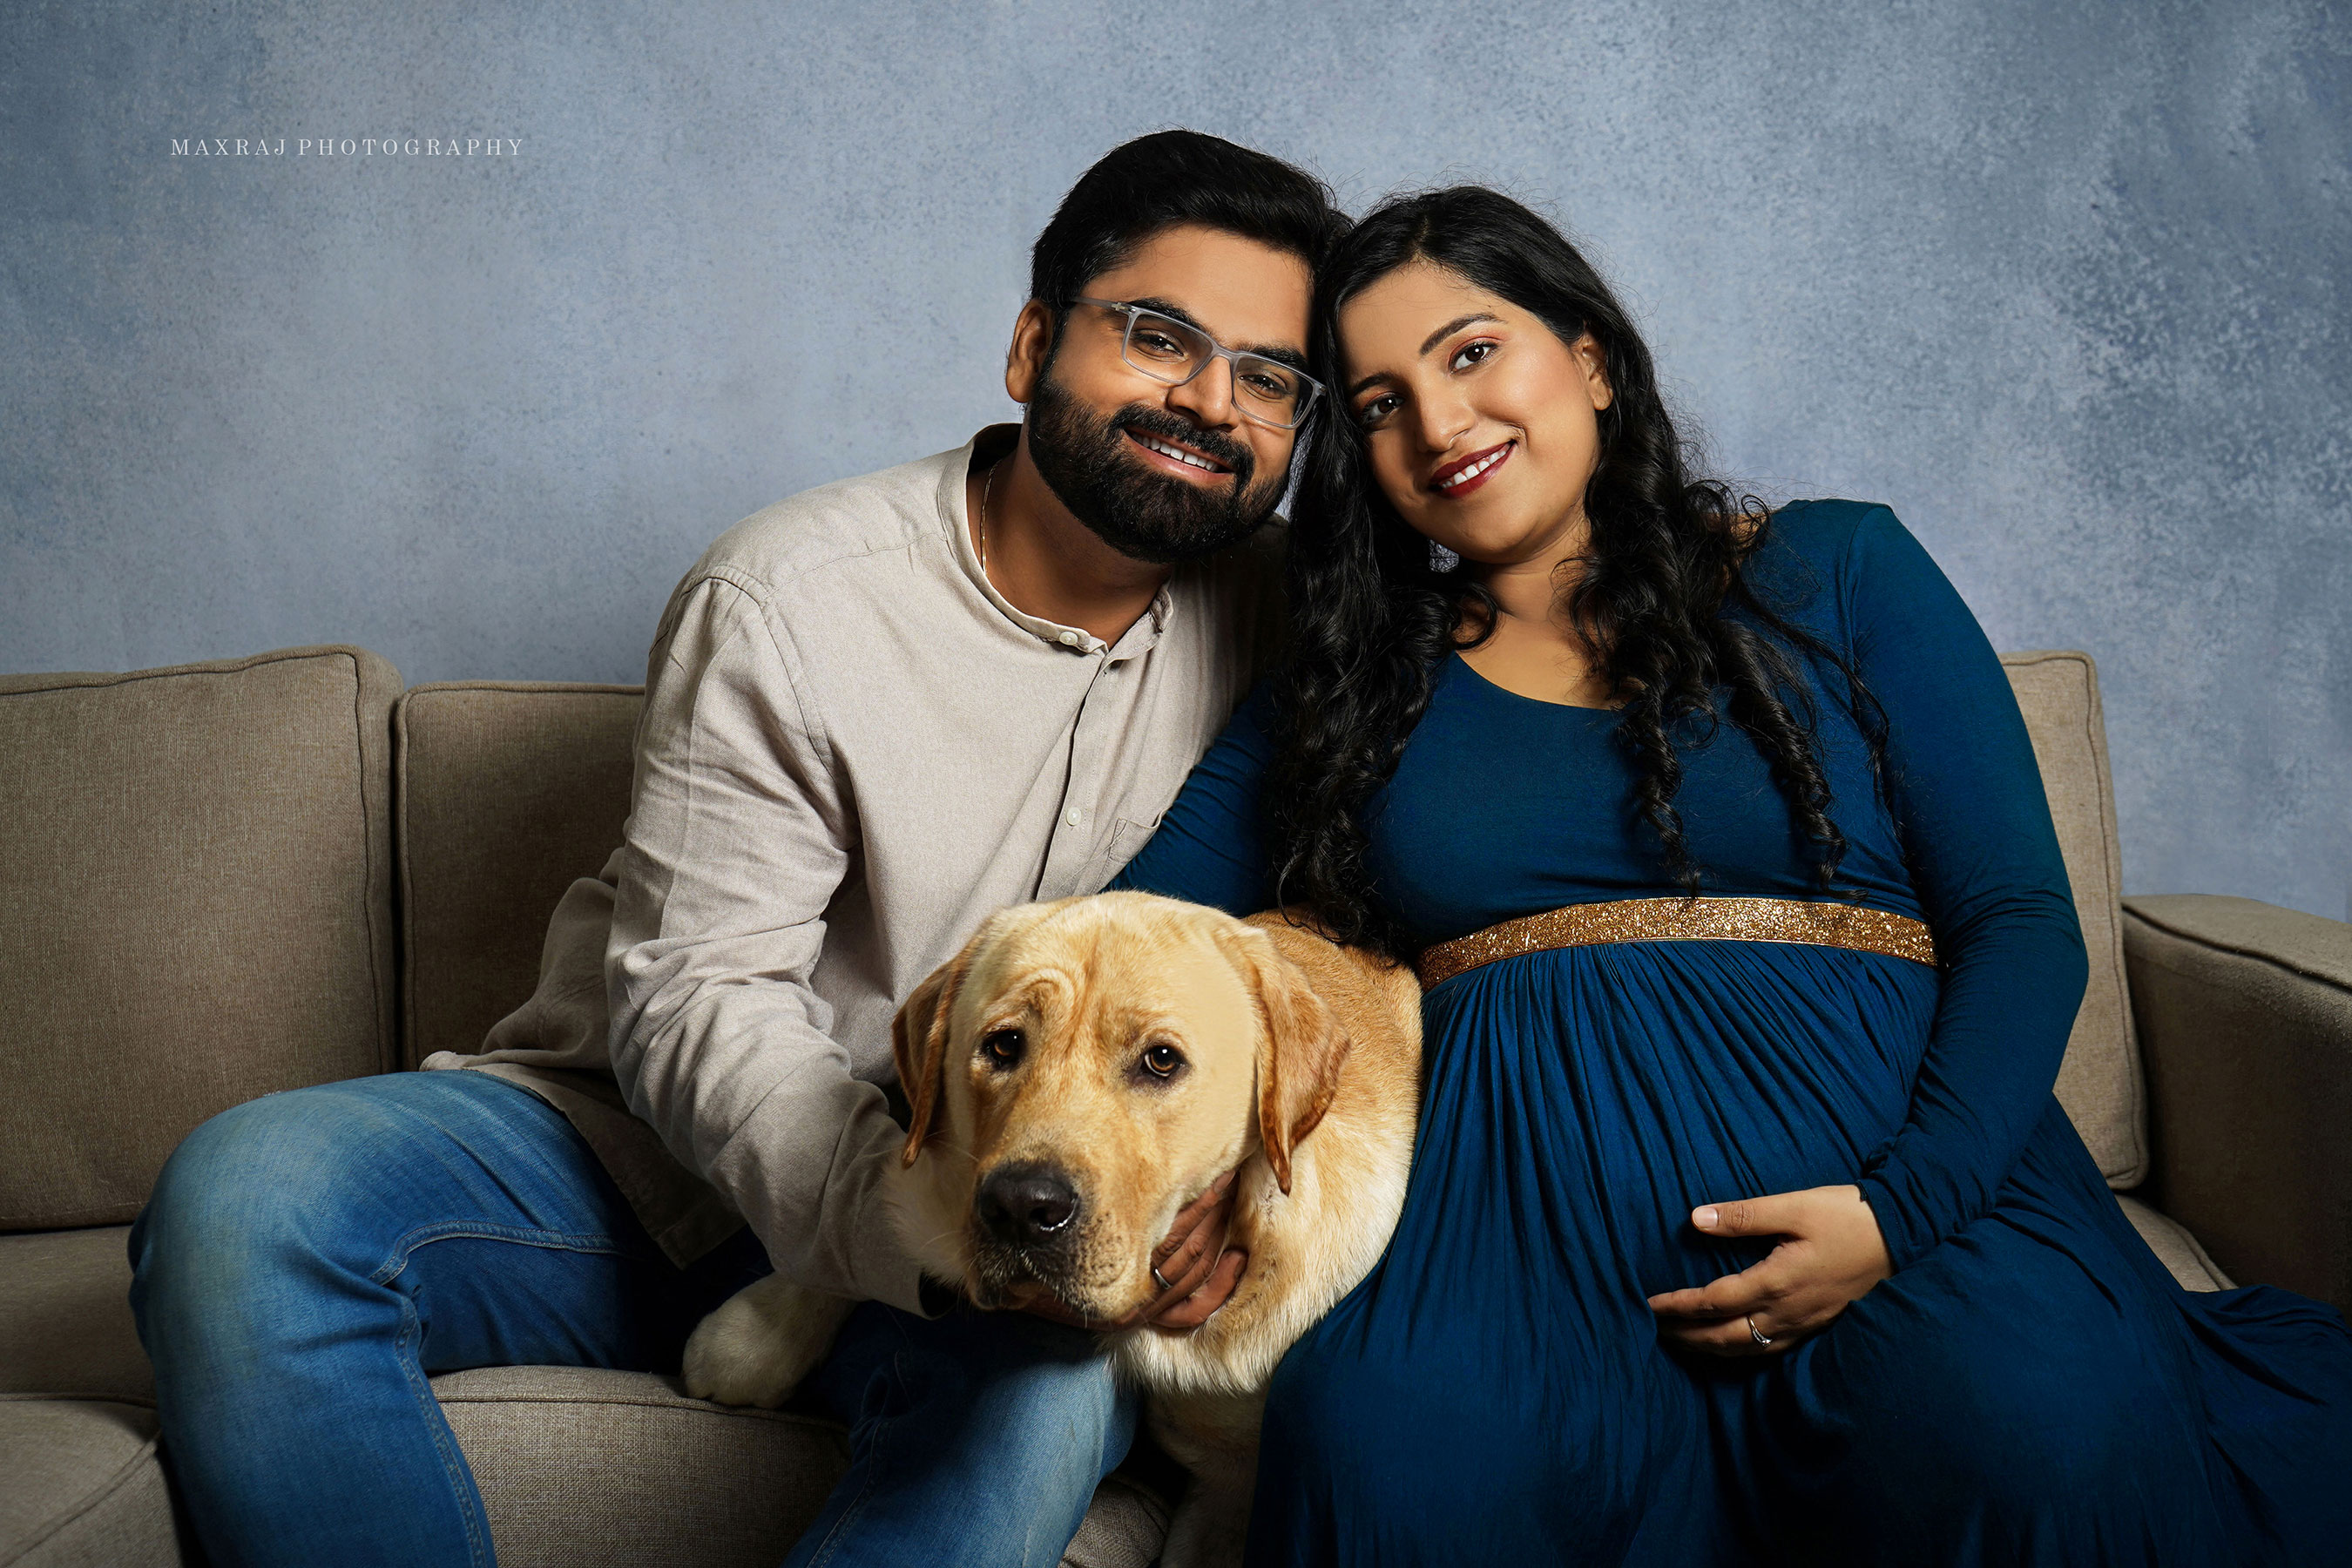 best maternity photographer in pune, best maternity photographer in india, indoor pregnancy photoshoot in pune with pet